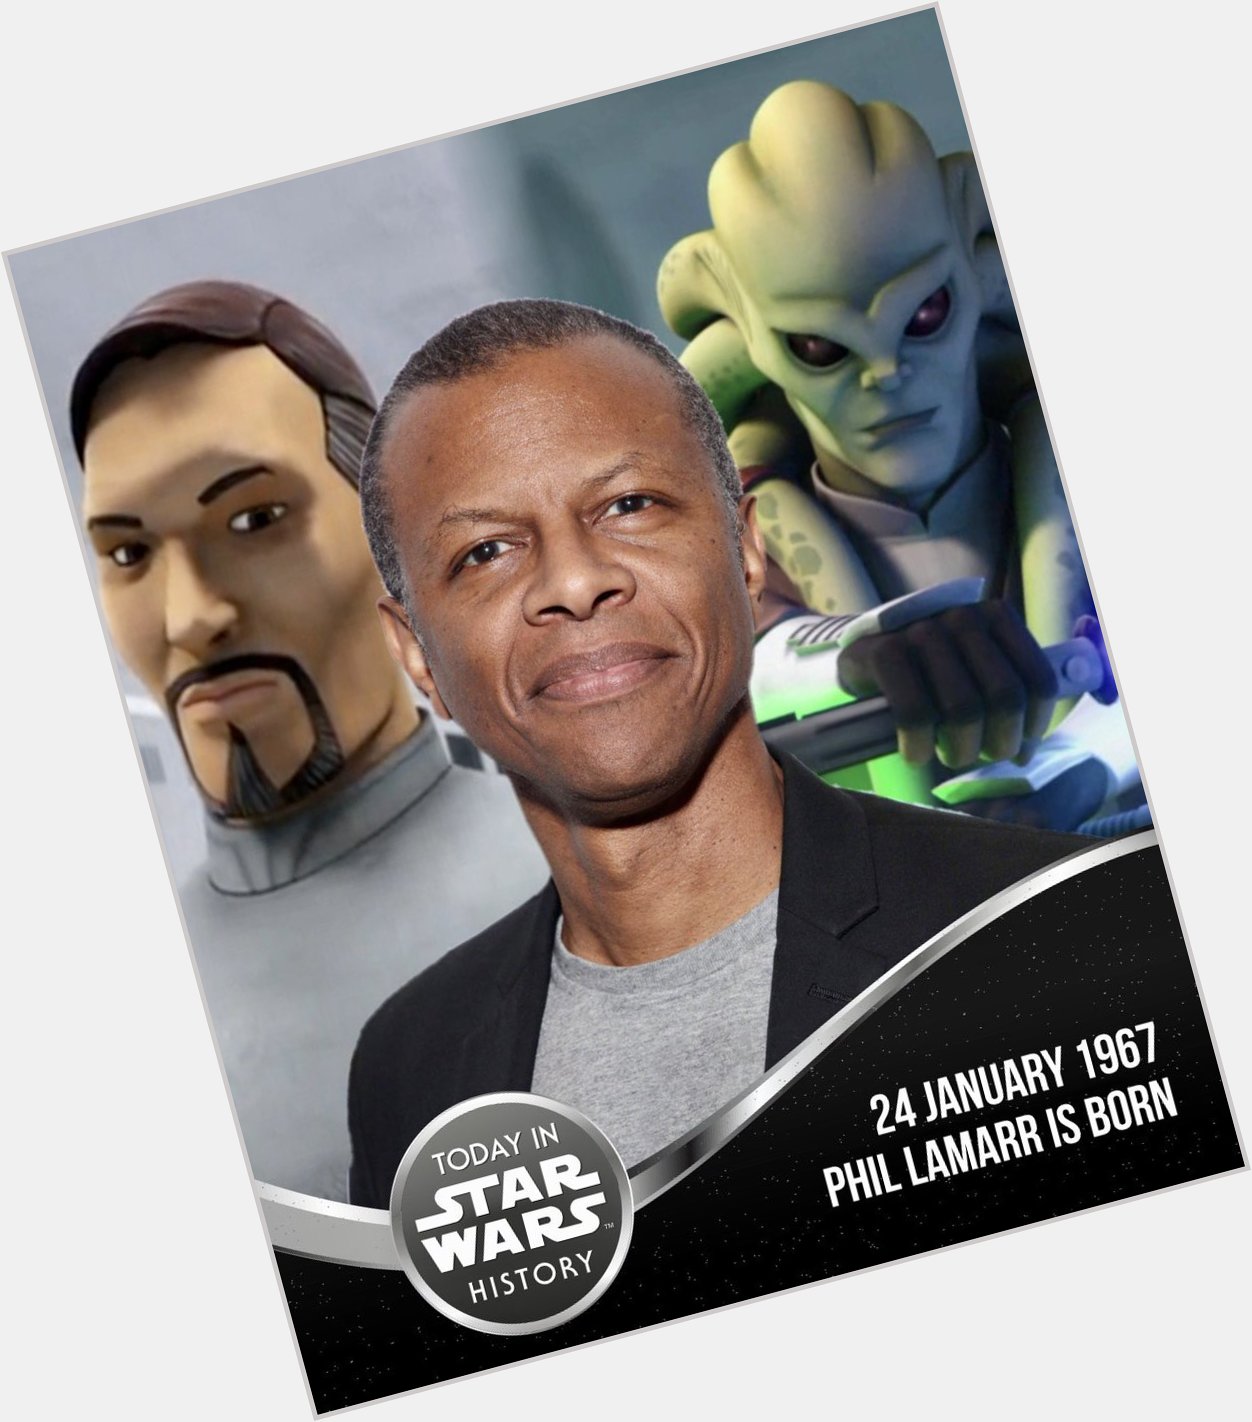 24 January 1967 Happy Birthday, Phil LaMarr! The legendary voice actor turns 54 today! 